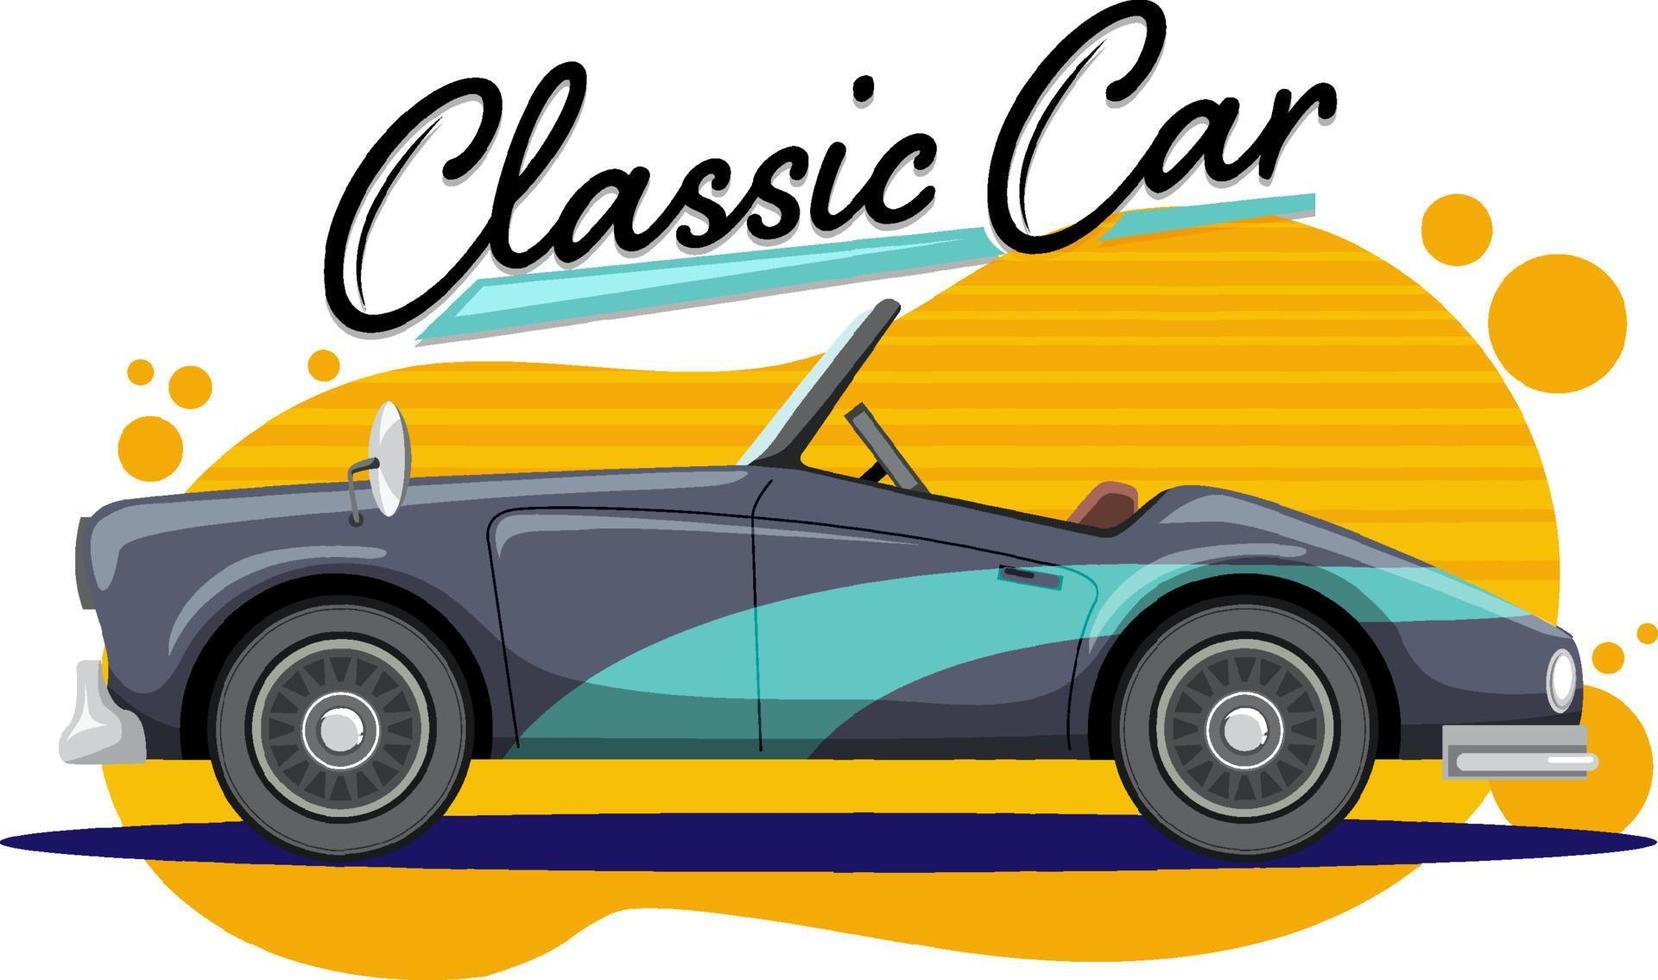 Classic car concept with old car side view vector